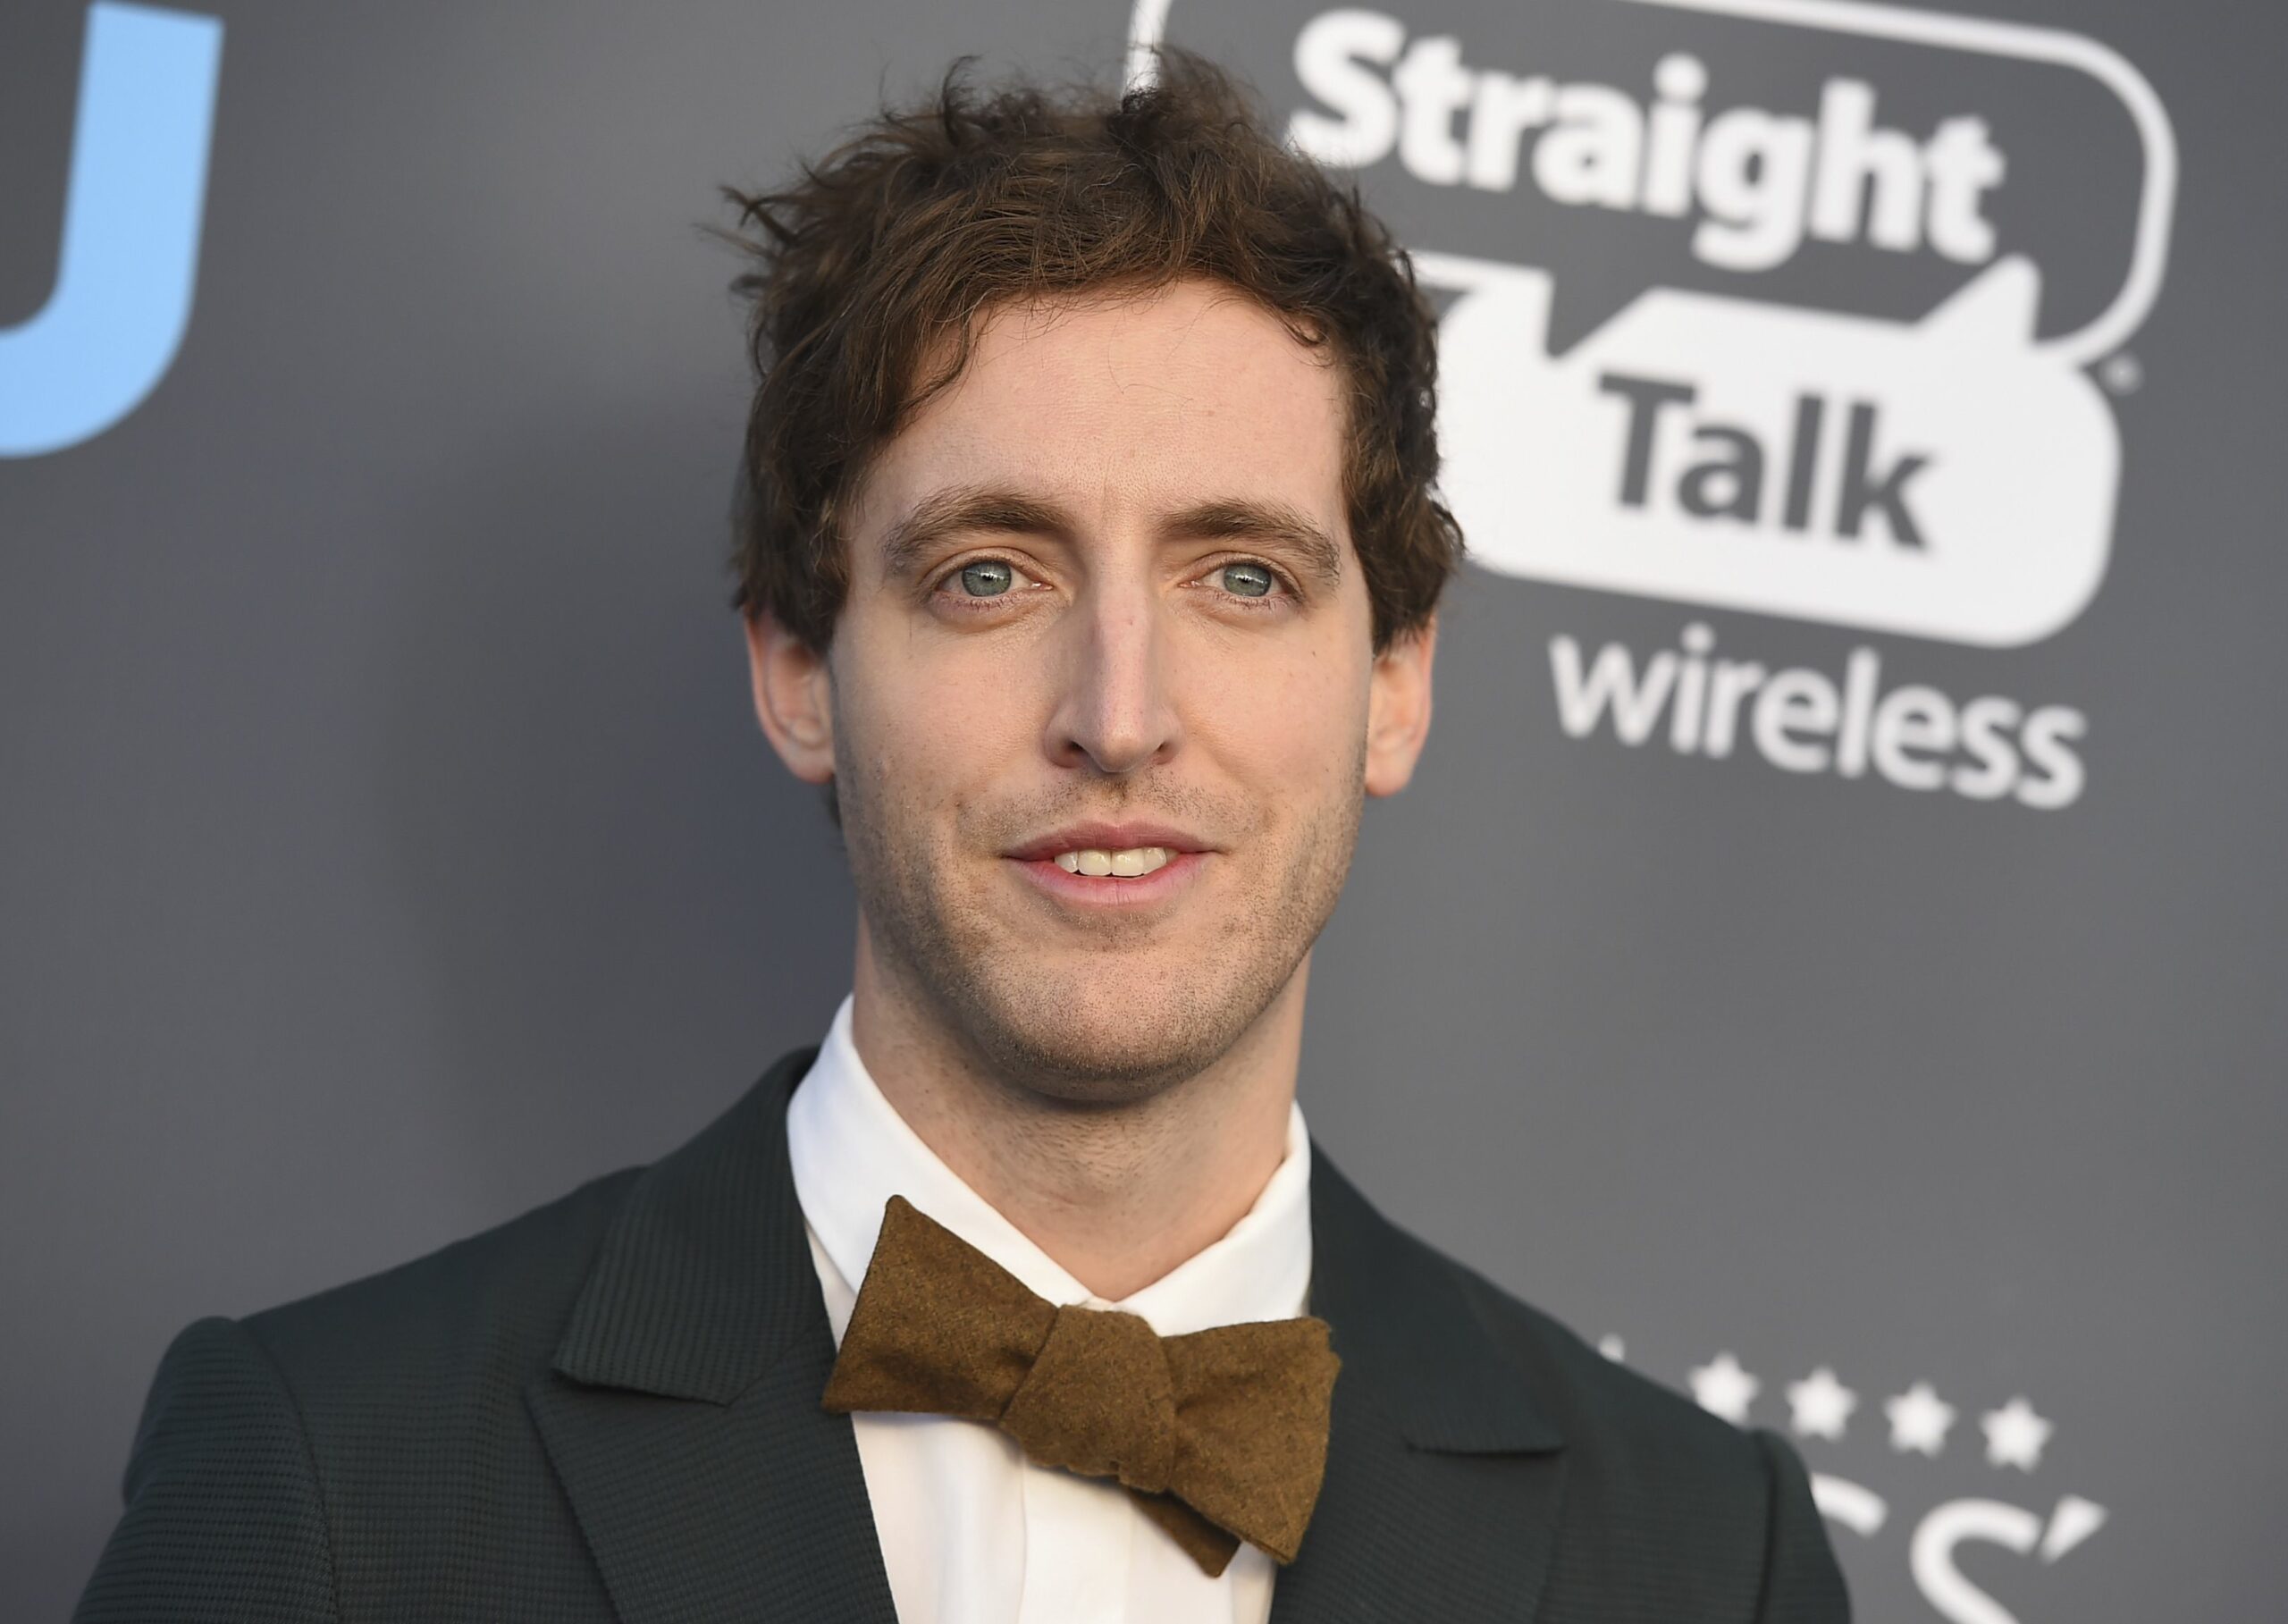 Thomas Middleditch (Canadian Actor) - Wife, Net Worth, Movies, Age